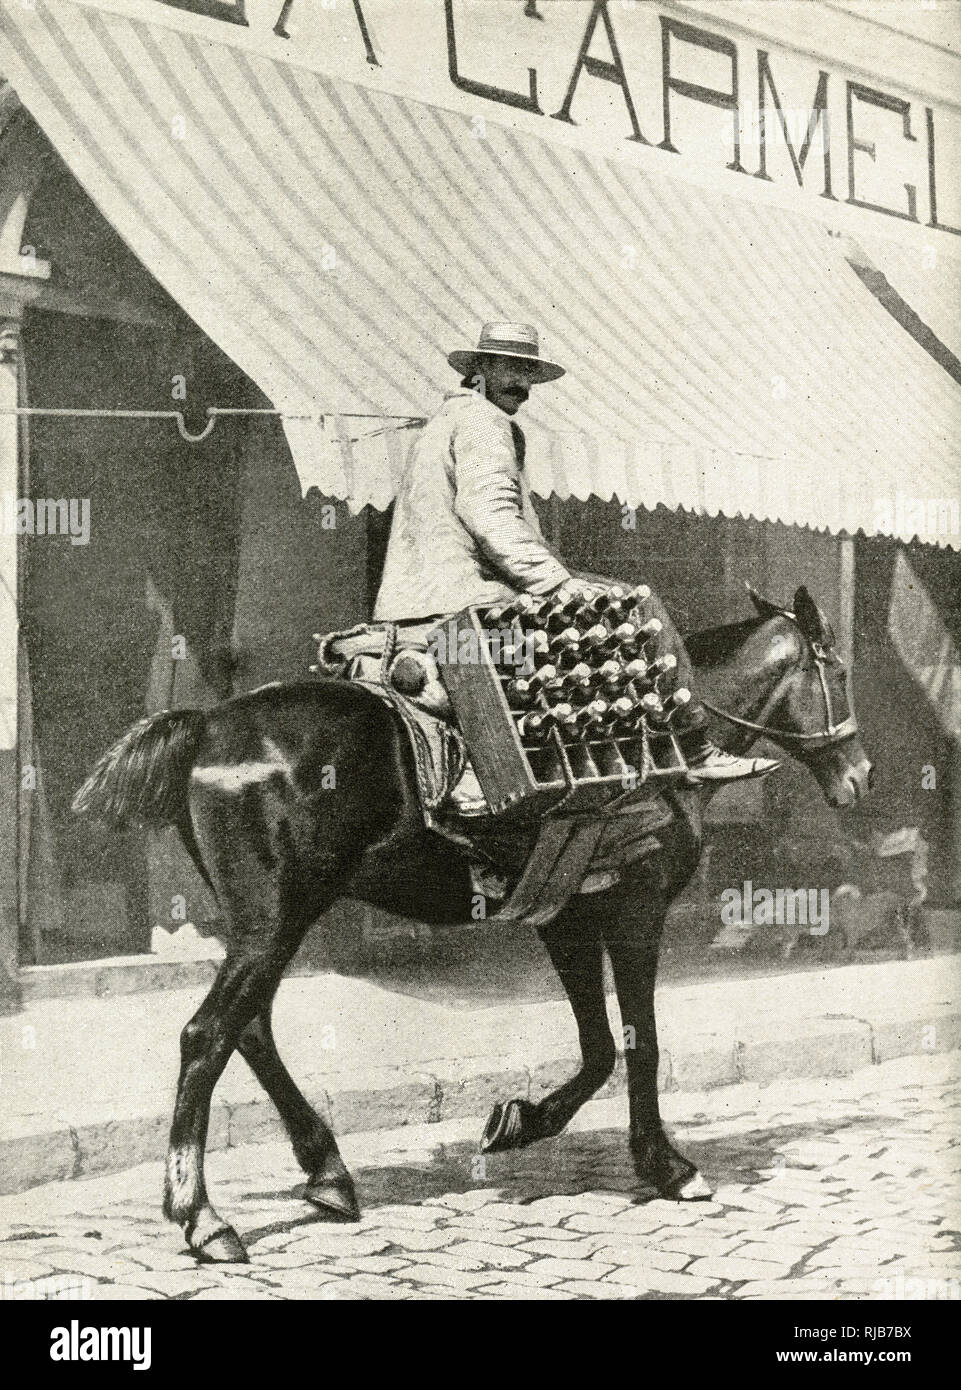 Man on horseback, delivering a crate of beer in the city of Valparaiso, Chile, South America, which is too hilly for wheeled vehicles. Stock Photo